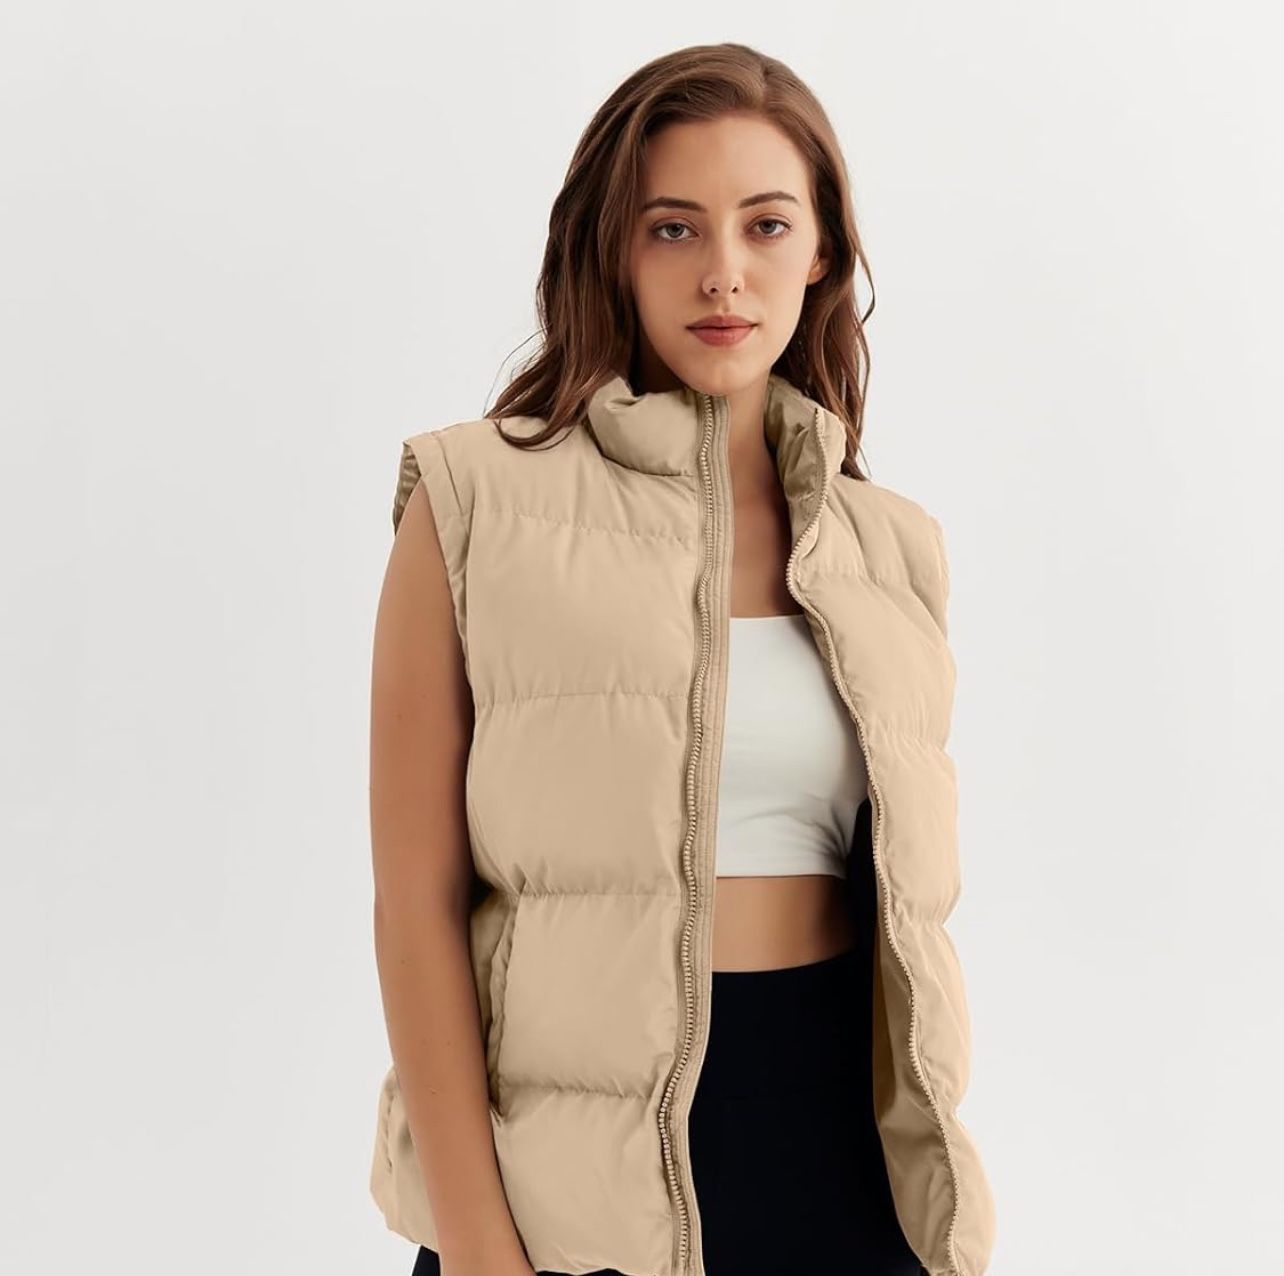 Trendy Queen Puffer Vest Womens Oversized Zip Up Jackets Stand-up Collar Down Vest with Pocket Lightweight Fall Fashion Coat